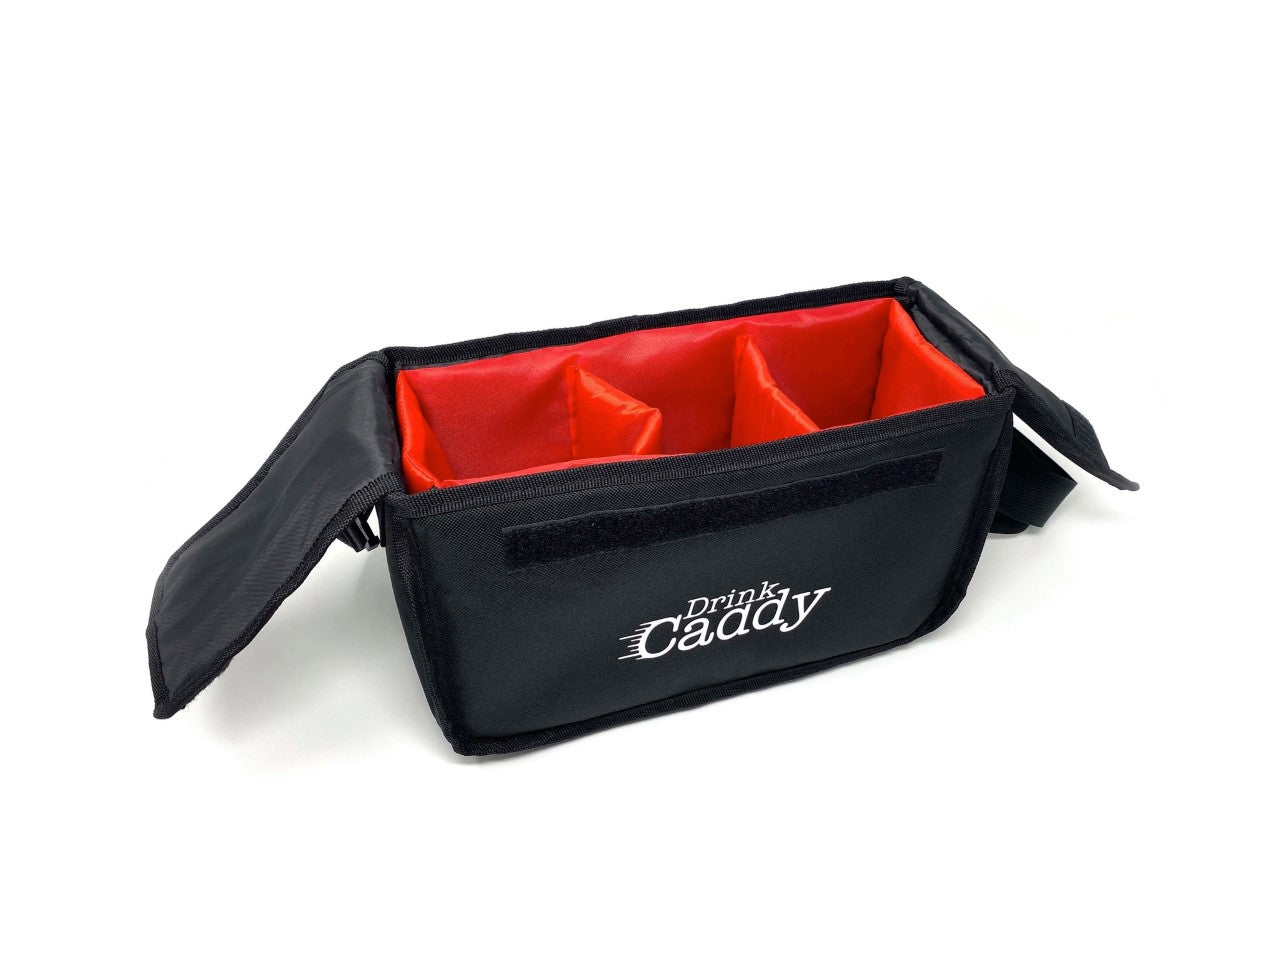 Reusable Insulated Three Cups Carrier